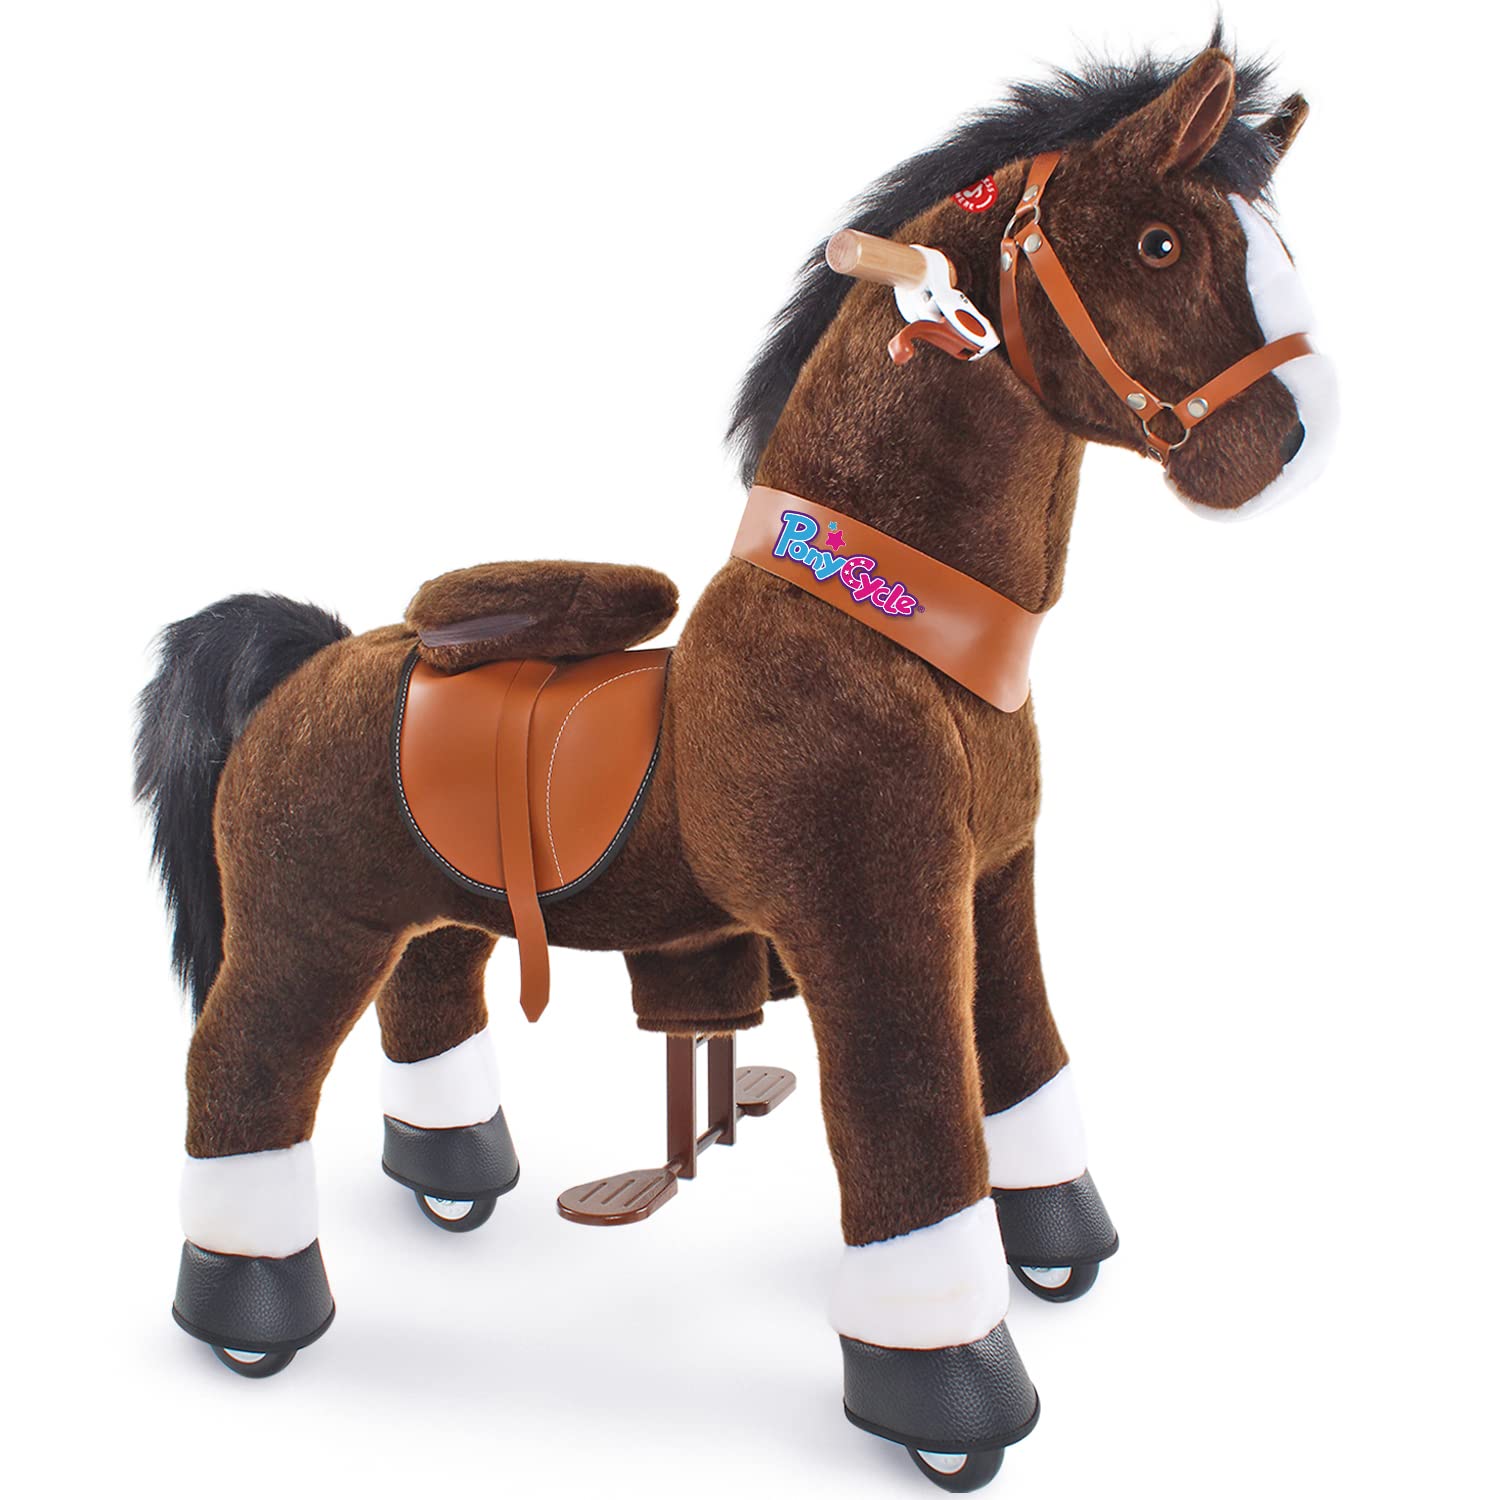 PonyCycle Official Classic U Series Ride on Horse Toy Plush Walking Animal Chocolate Brown Horse Size 4 for Age 4-8 Ux421